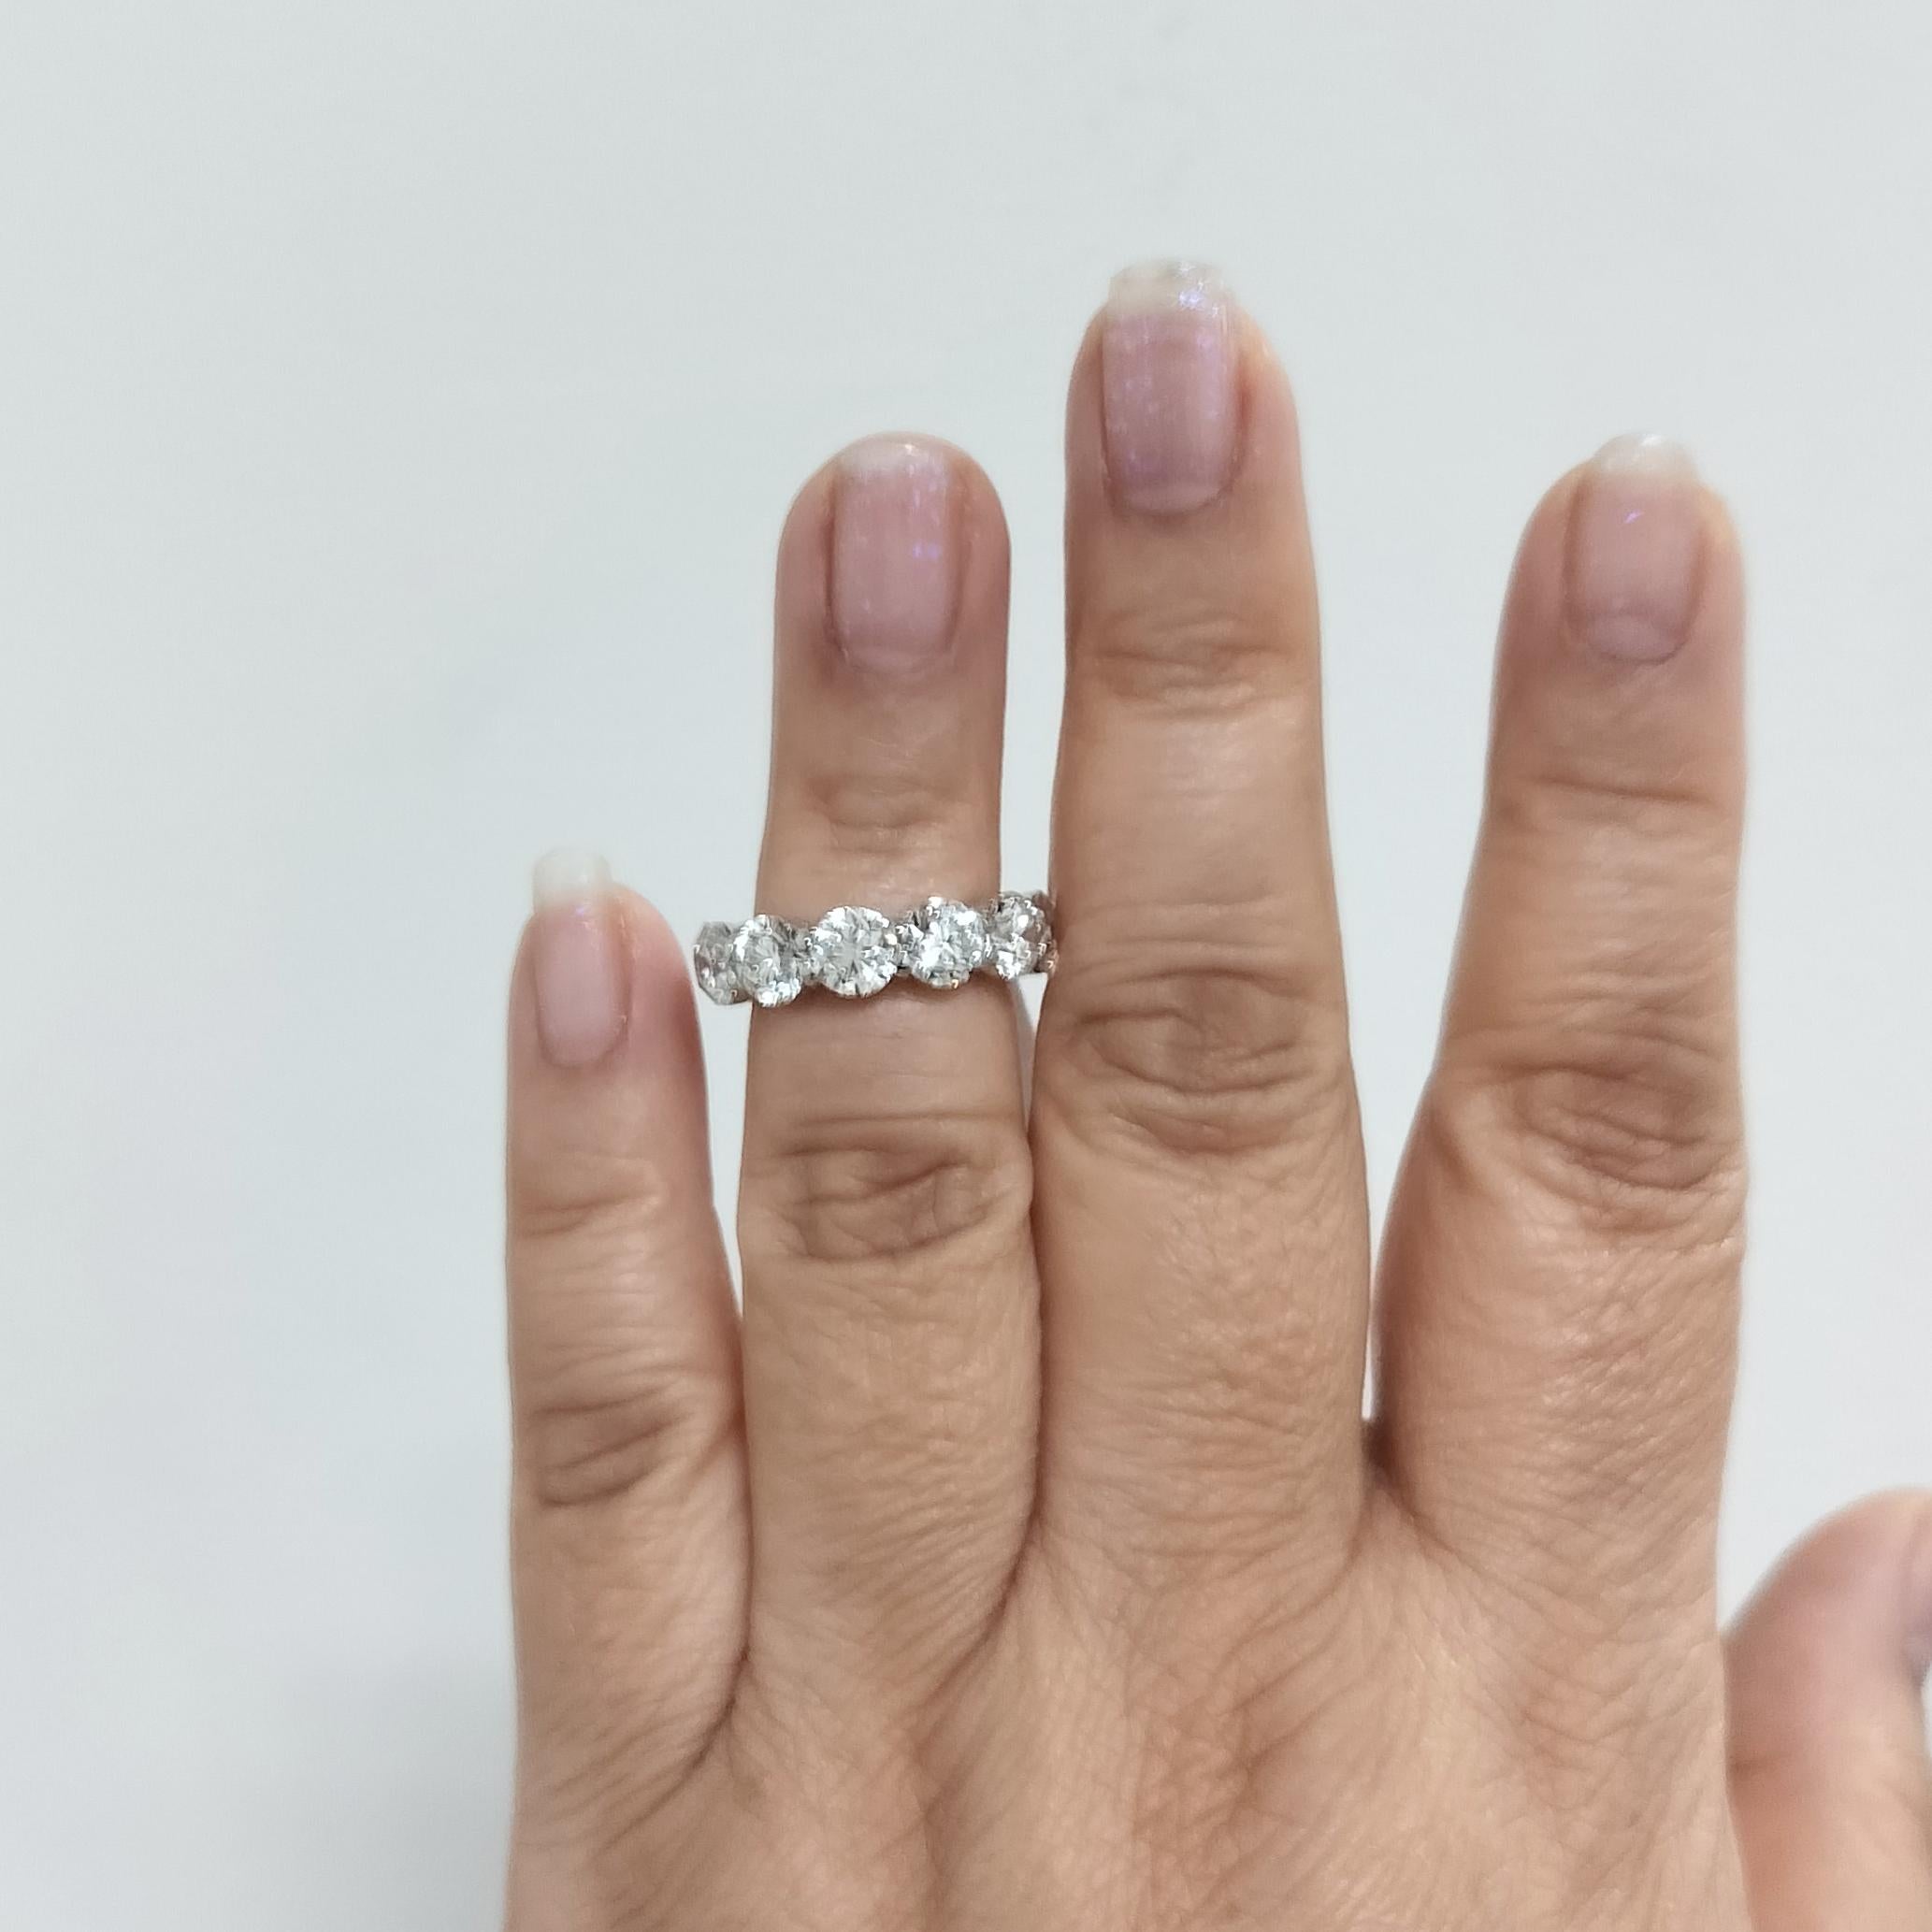 Beautiful 8.40 ct. white diamond HIJ VS2-SI2 white diamond rounds  Total of 12 stones.  Handmade in 18k white gold.  Ring size 6.  All stones have a GIA certificate.